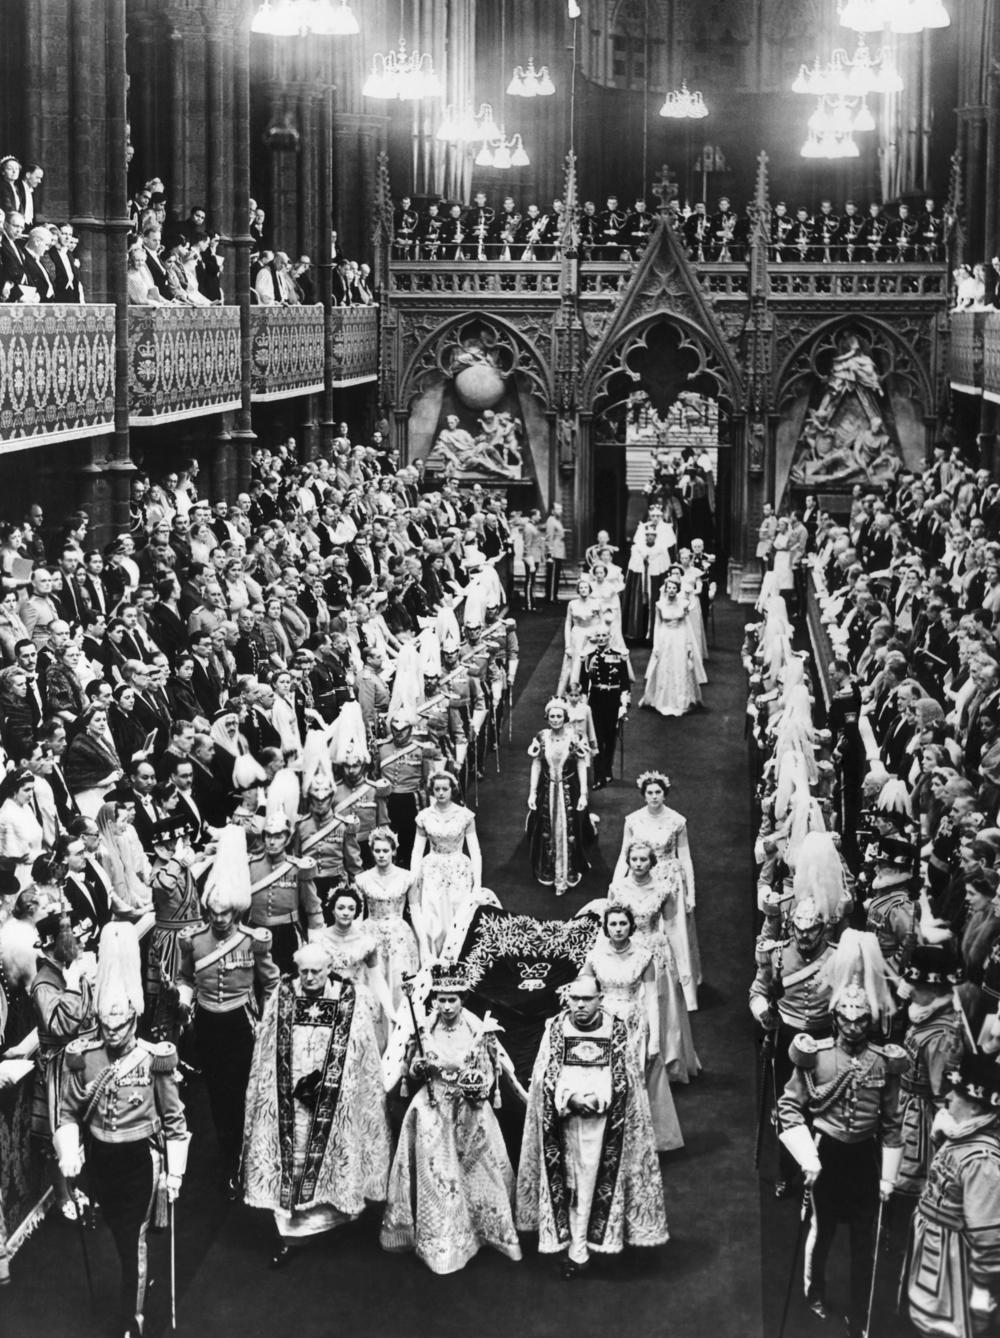 Queen Elizabeth II walks down the aisle at Westminster Abbey, on her coronation day.